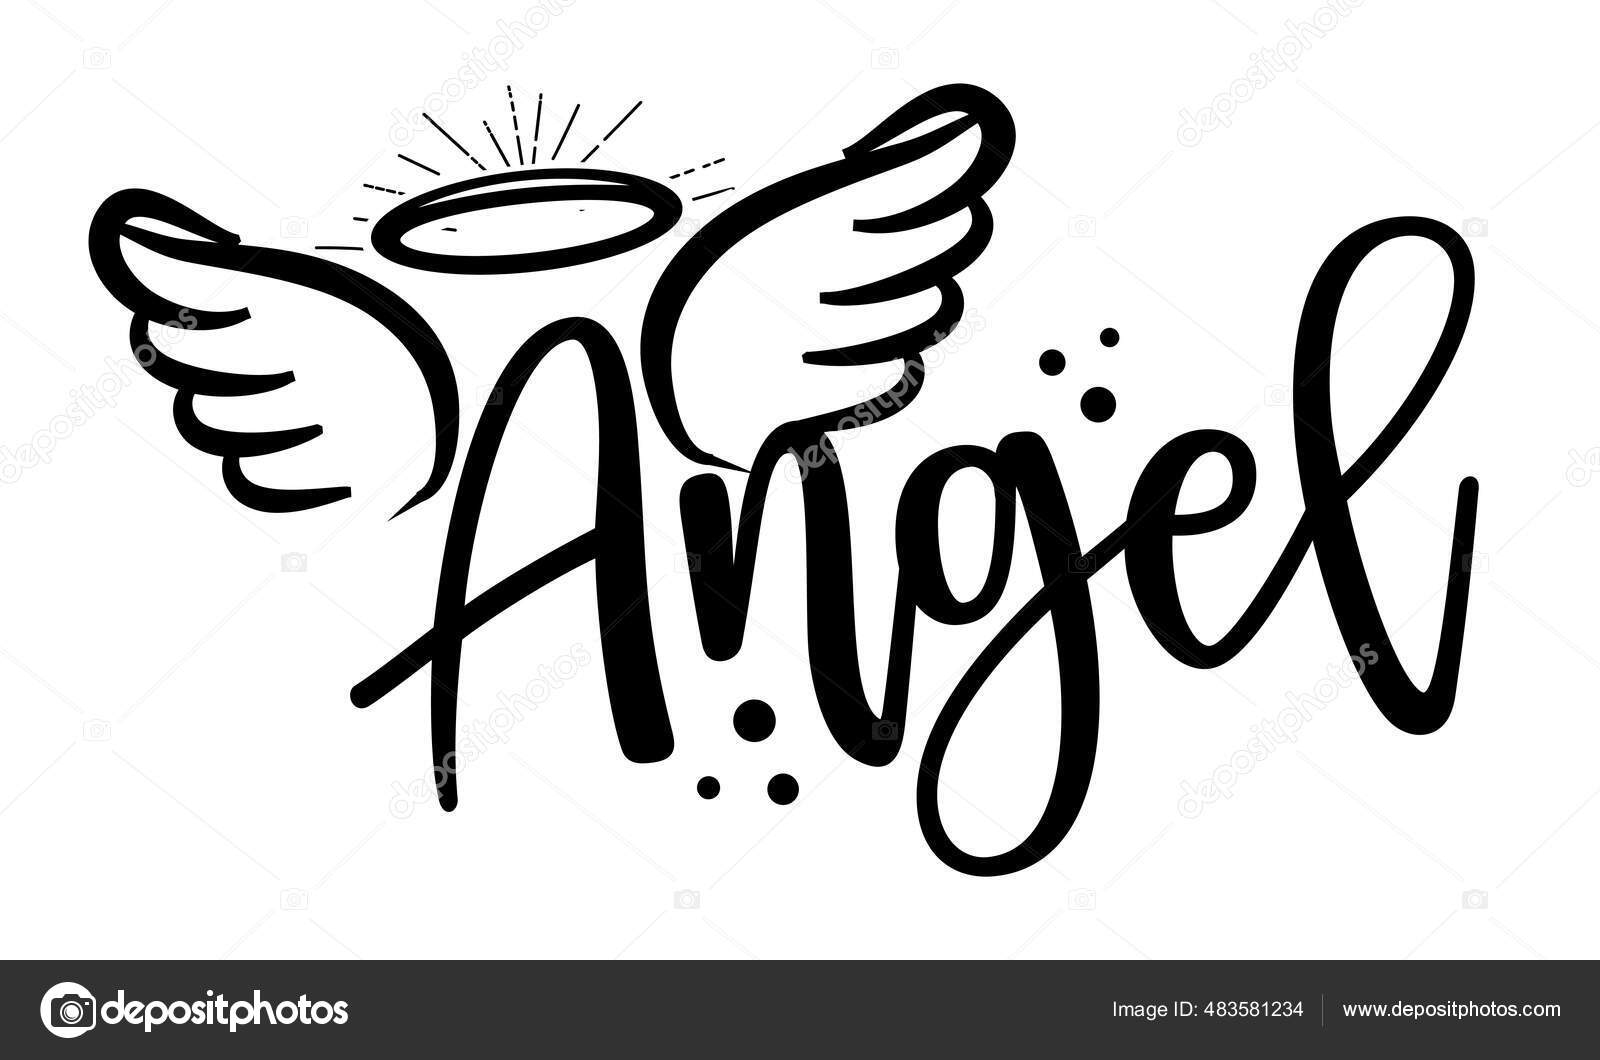 angel-hand-drawn-beautiful-memory-phrase-modern-brush-calligraphy-rest-stock-vector-image-by-azindianlany-483581234